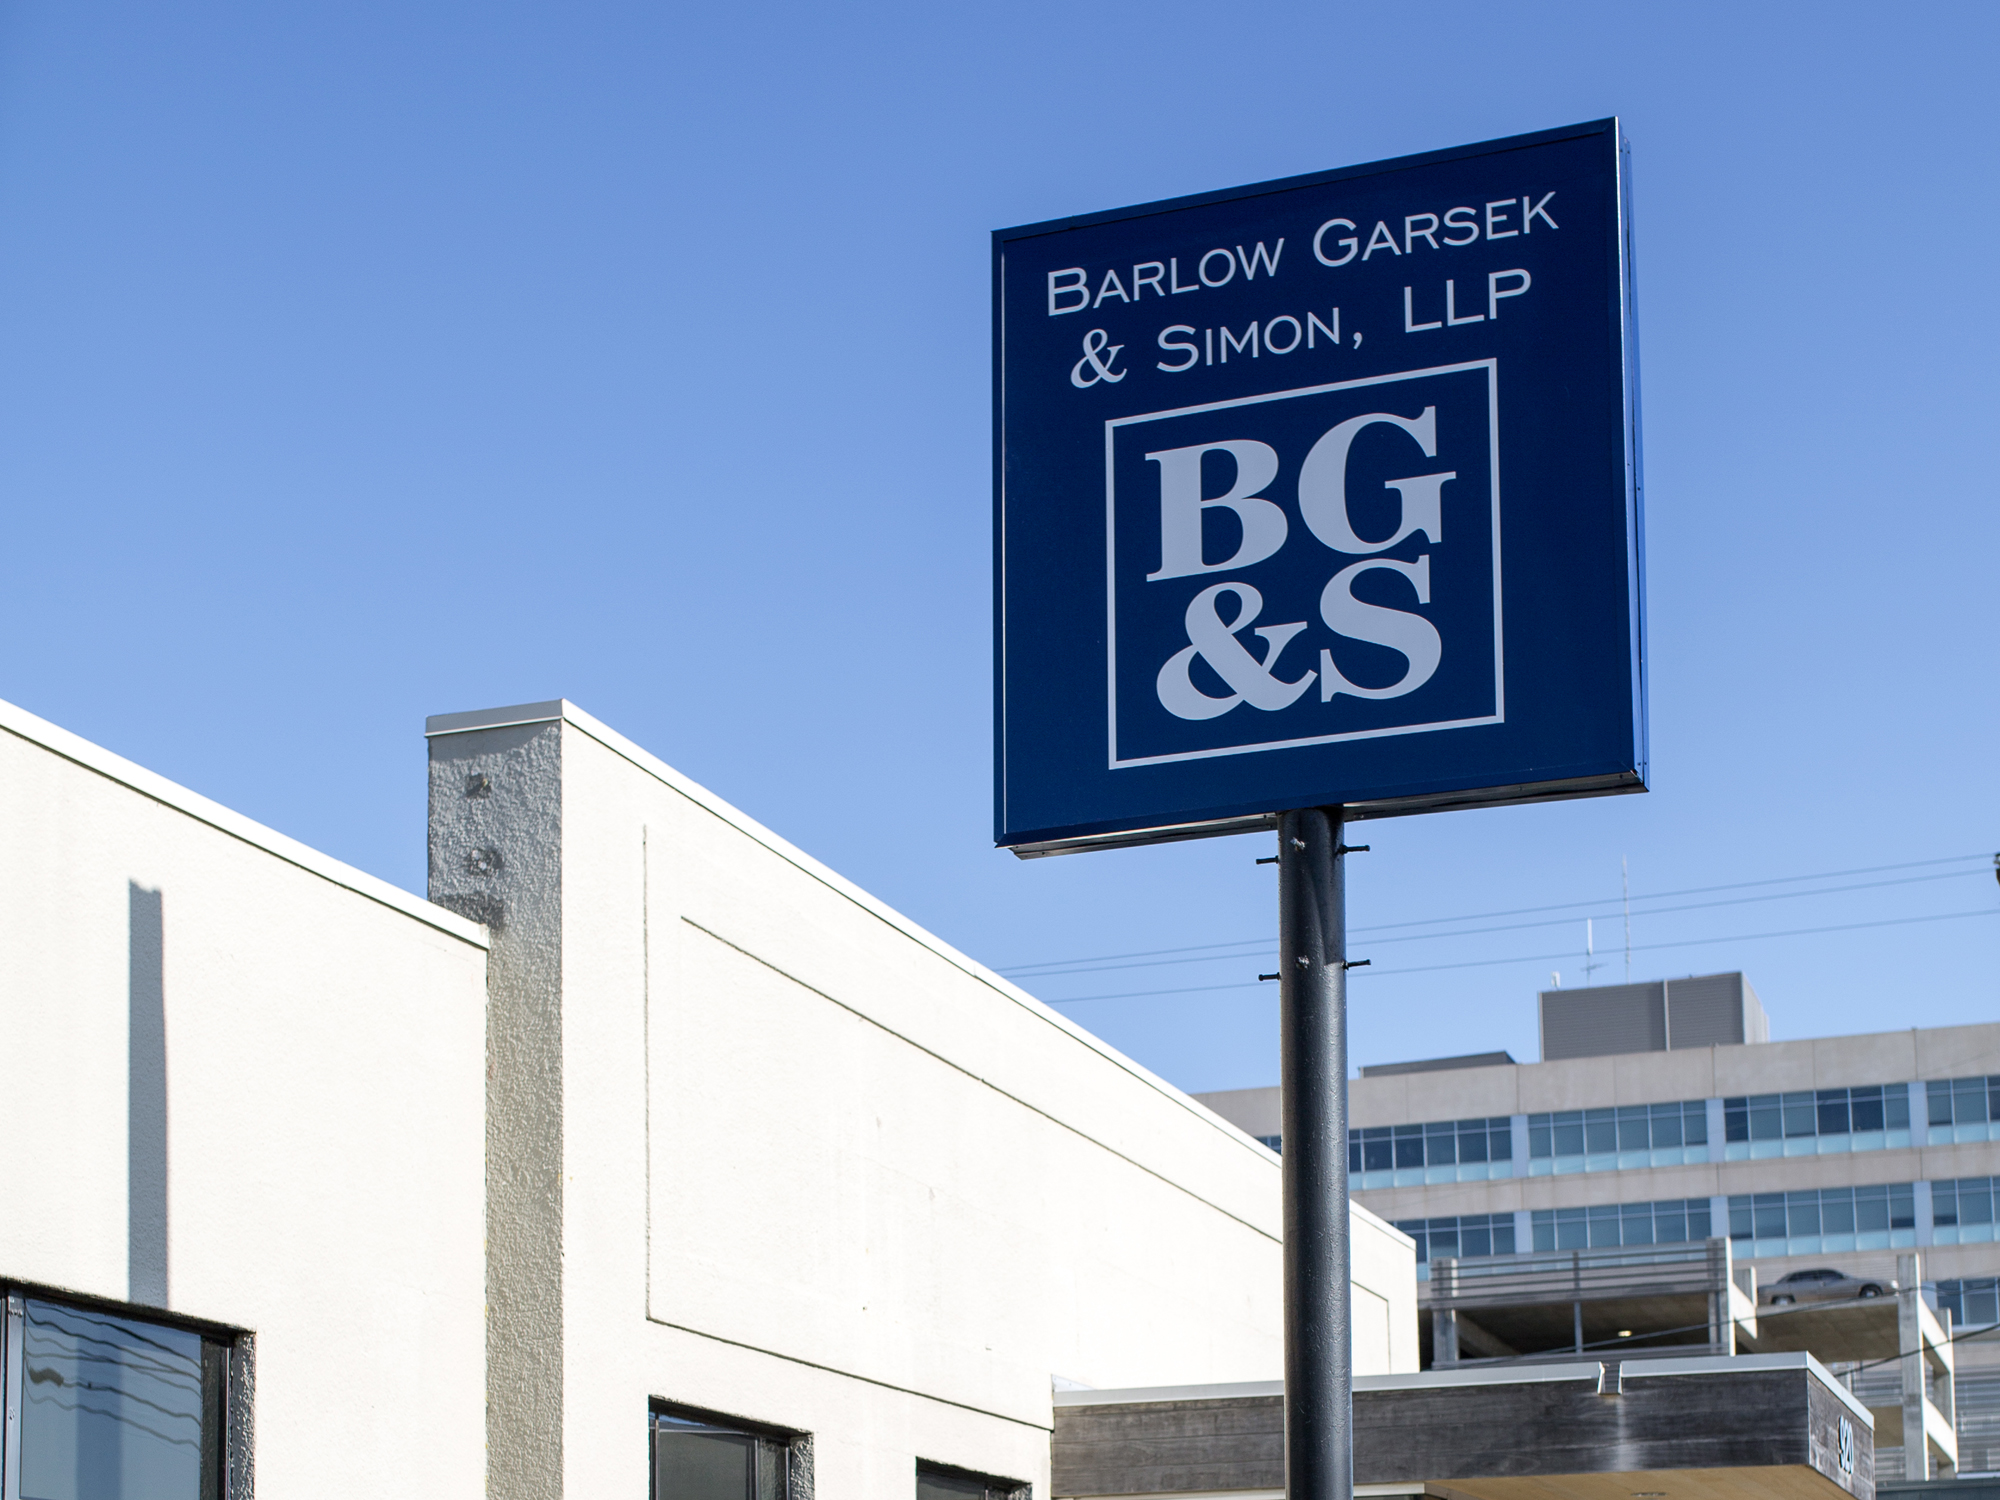 BGS law firm sign in fort worth texas